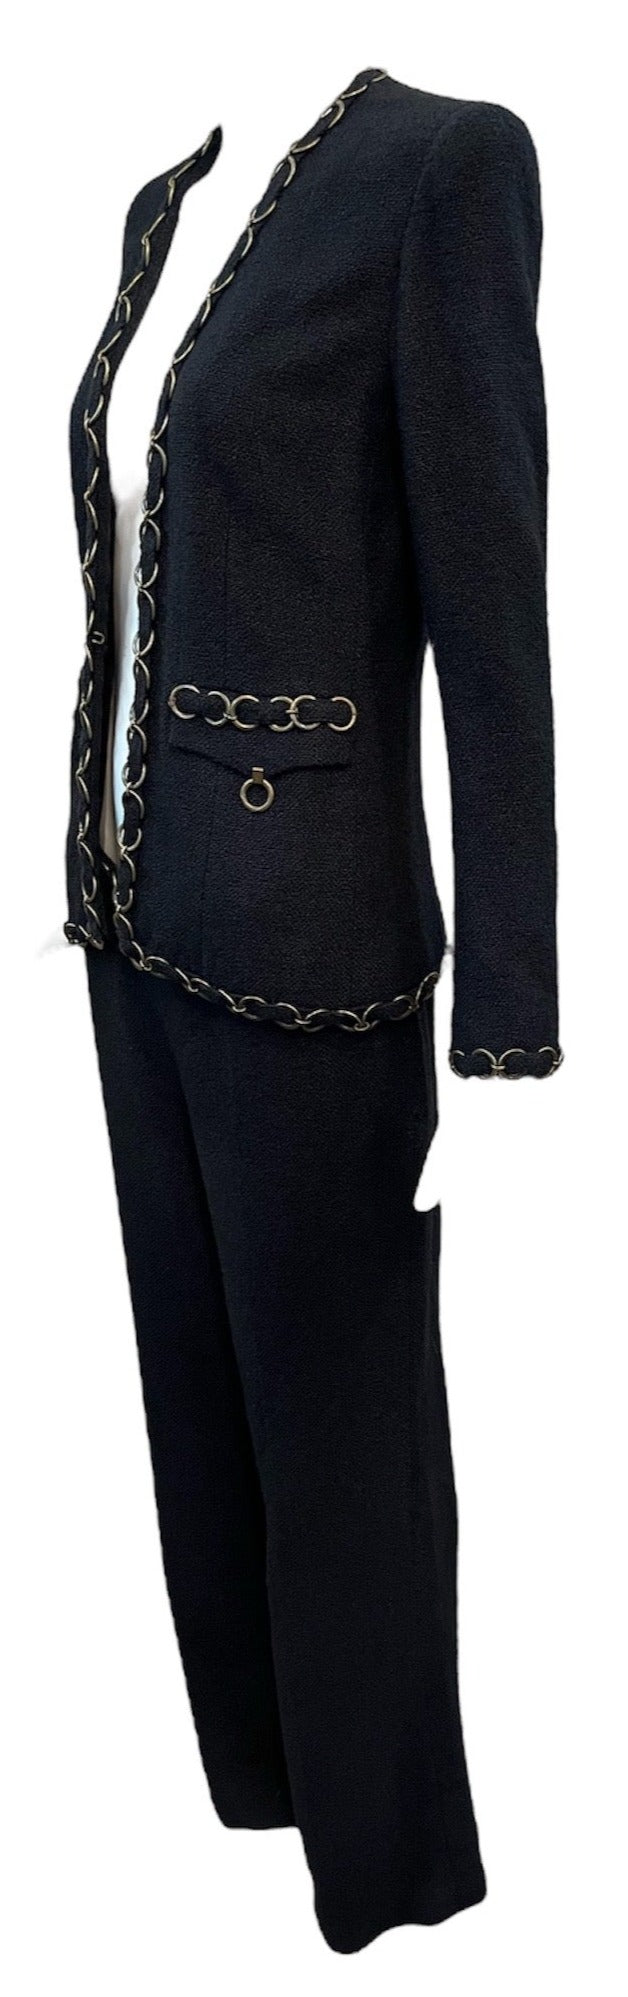 Chanel Contemporary Pant Suit Chain Detail THE WAY WE WORE